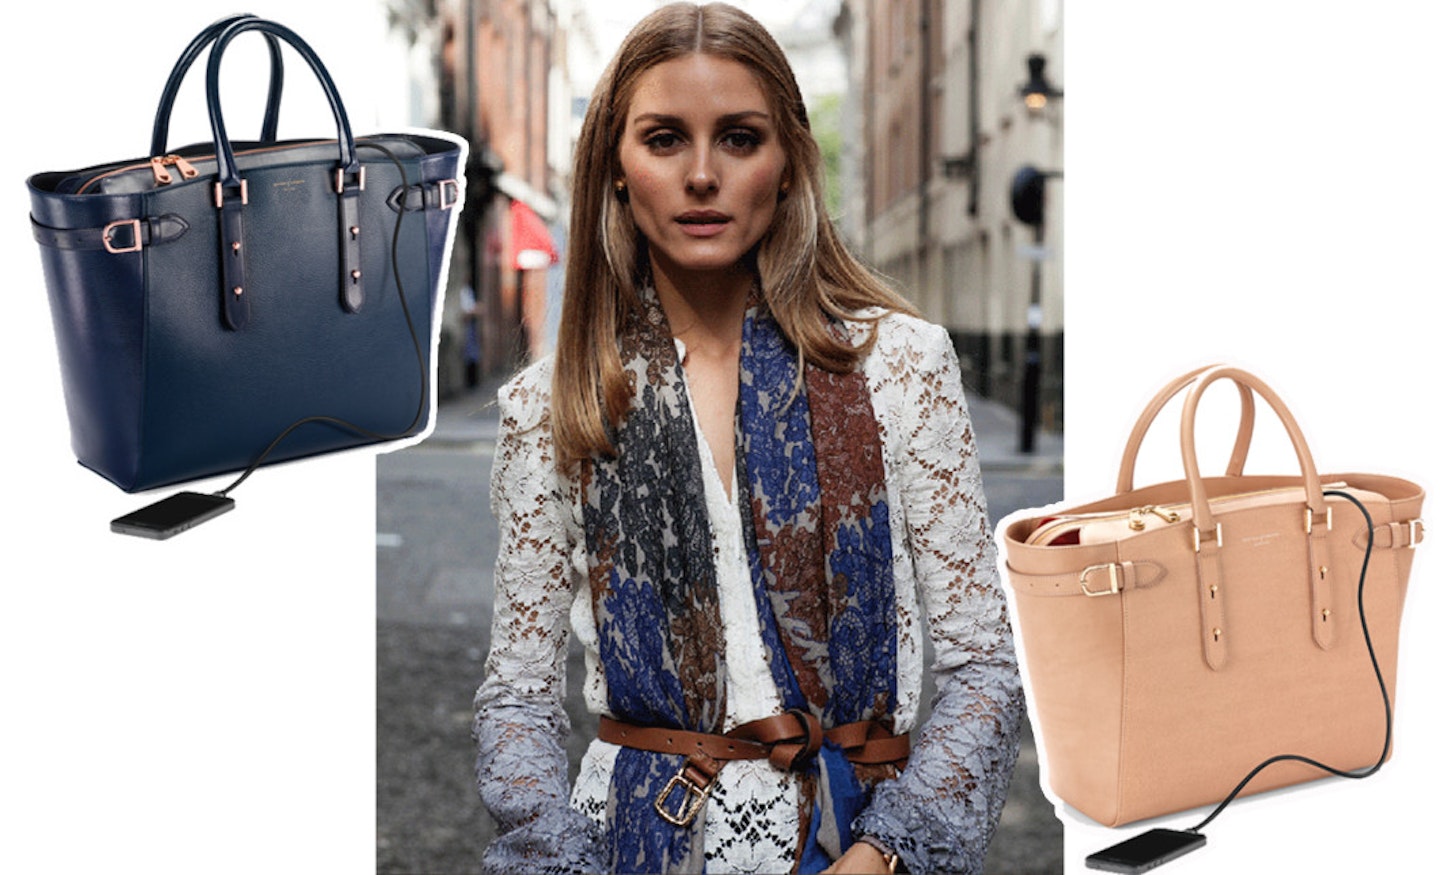 Another dream Olivia Palermo collaboration [Aspinal]